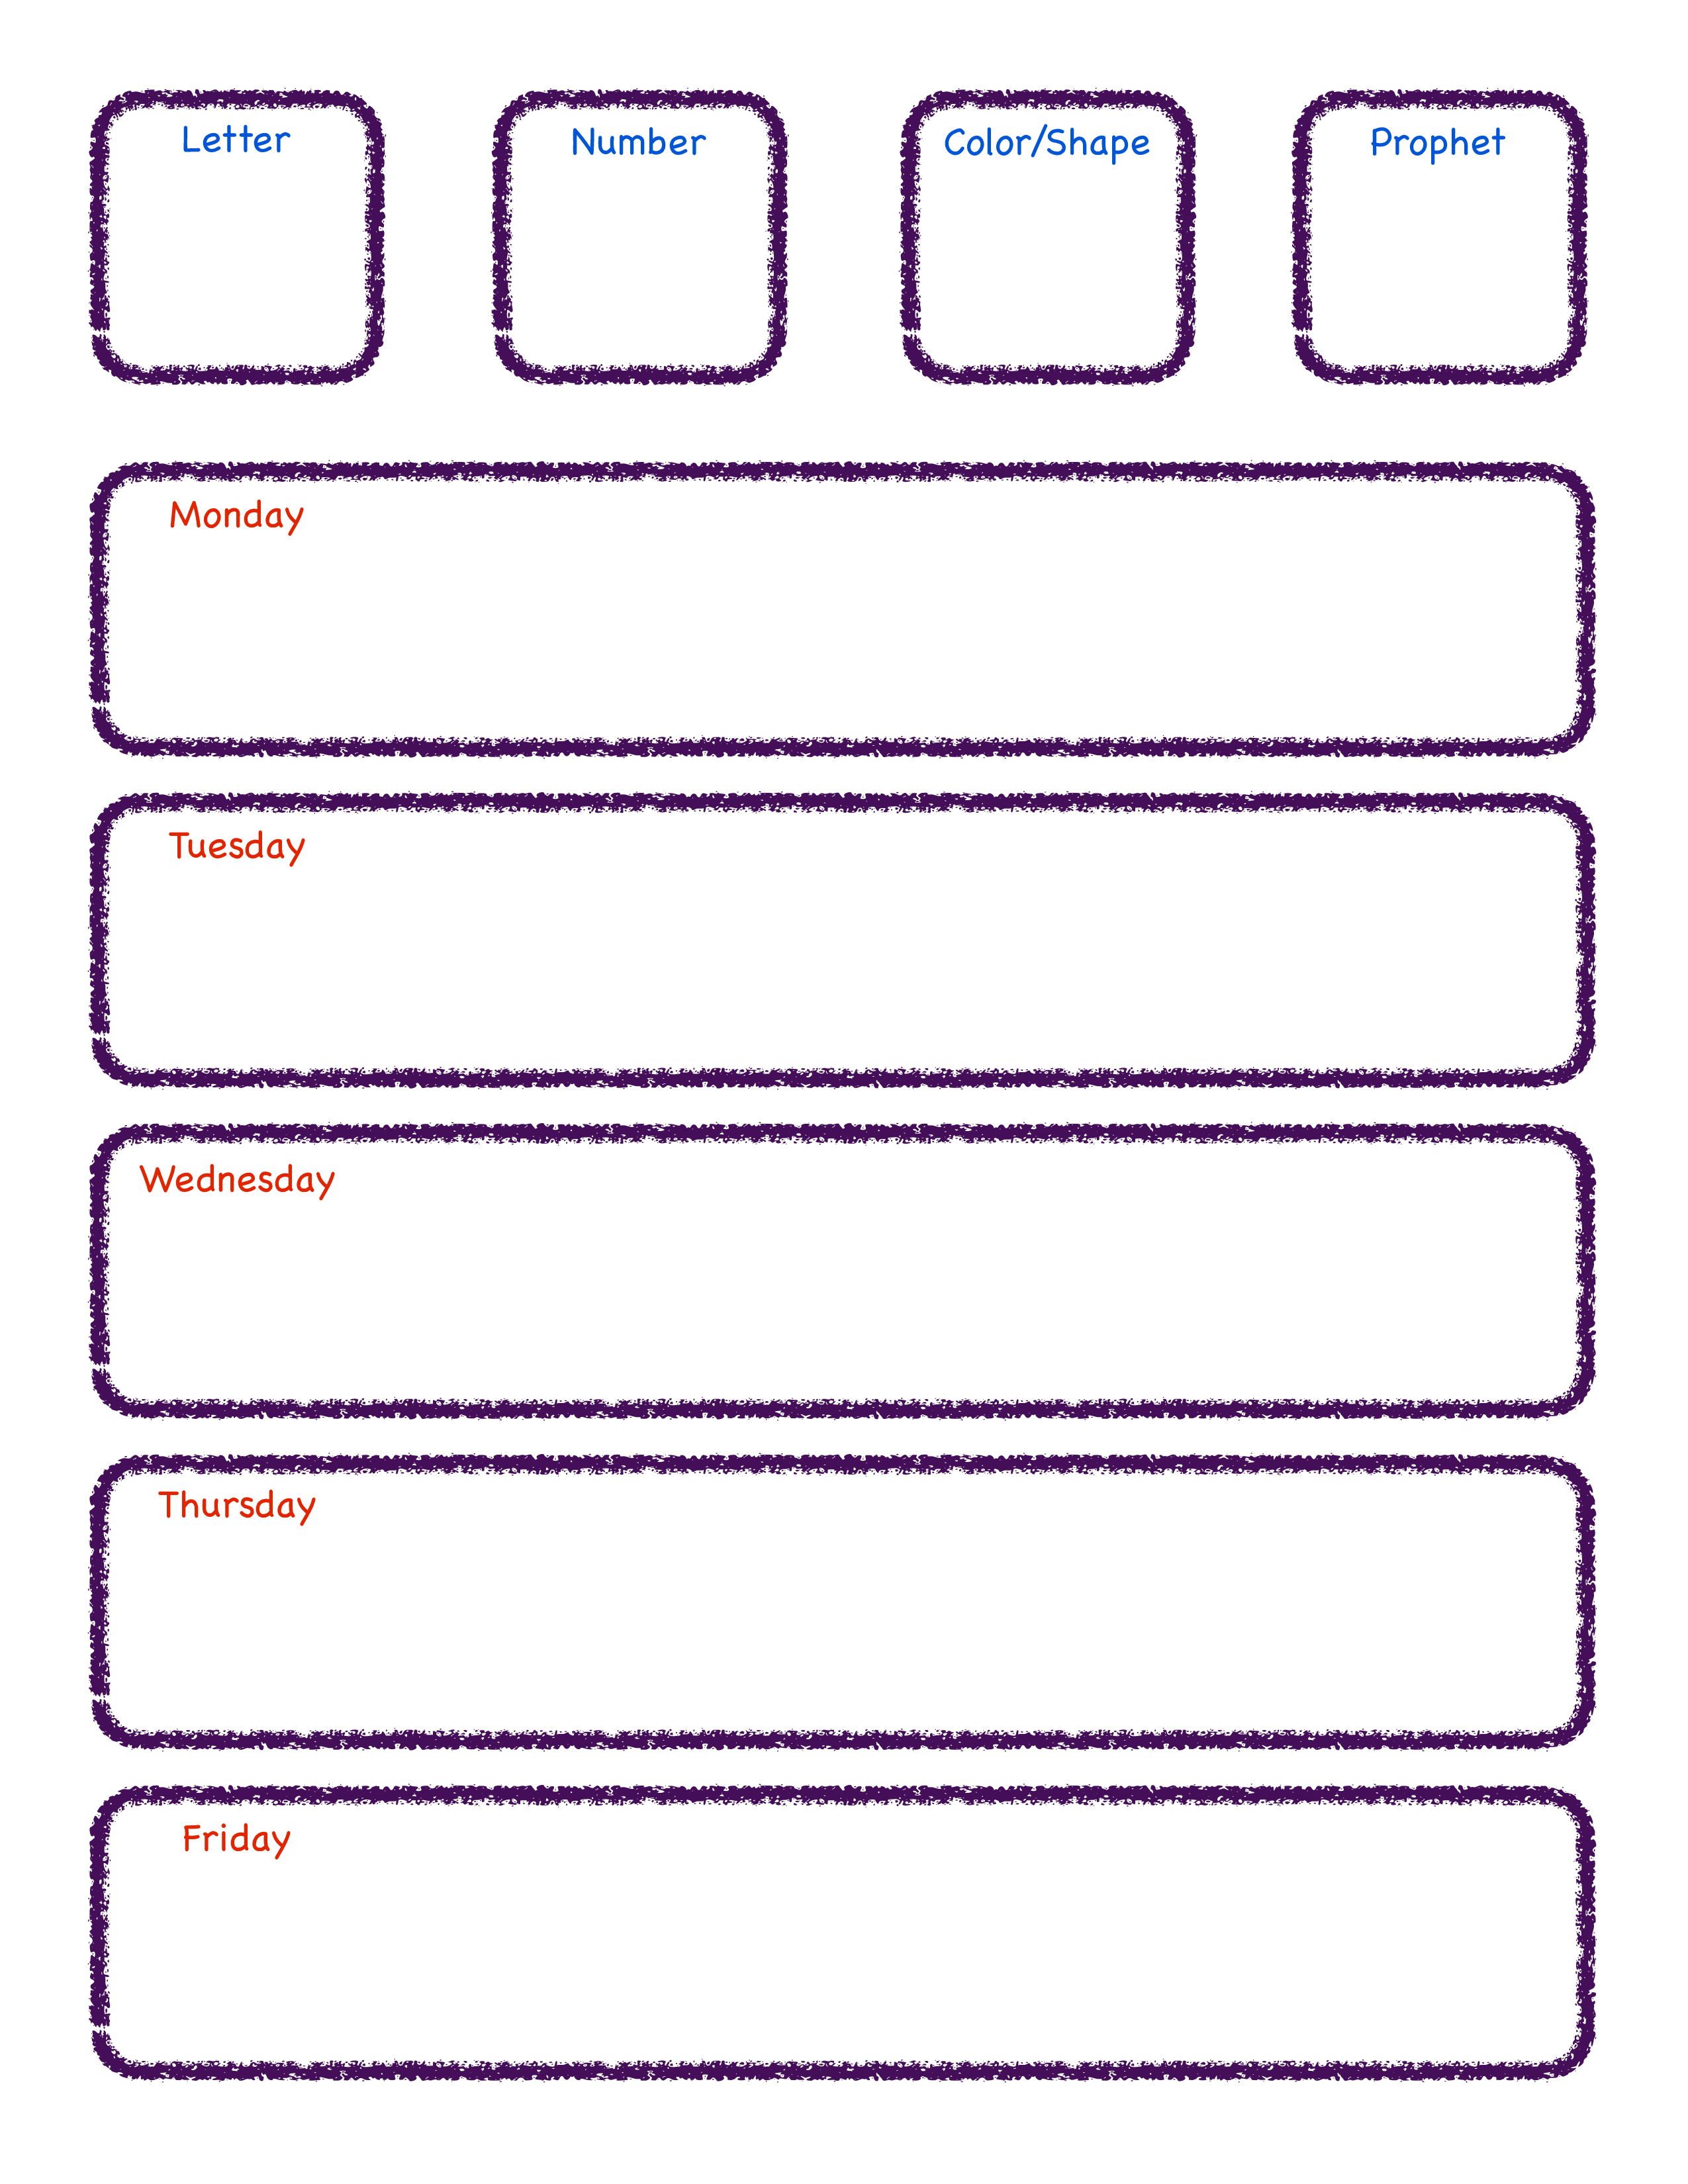 Preschool Weekly Lesson Plan | Templates at ...